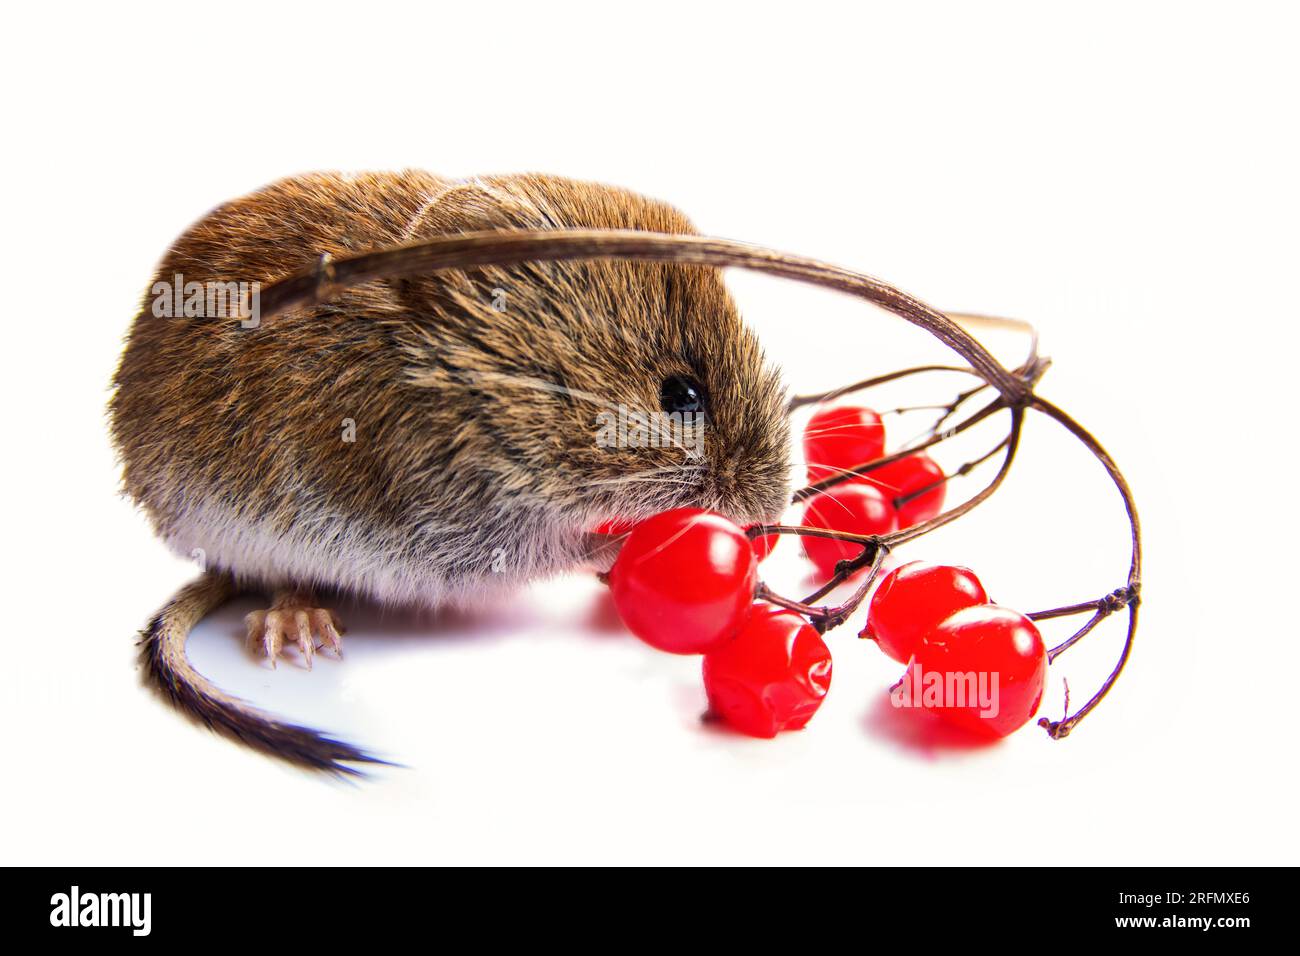 https://c8.alamy.com/comp/2RFMXE6/boreal-forests-gray-sided-vole-clethrionomys-rufocanus-and-ripe-red-european-dogwood-viburnum-opulus-berries-are-the-preferred-food-isolated-on-w-2RFMXE6.jpg